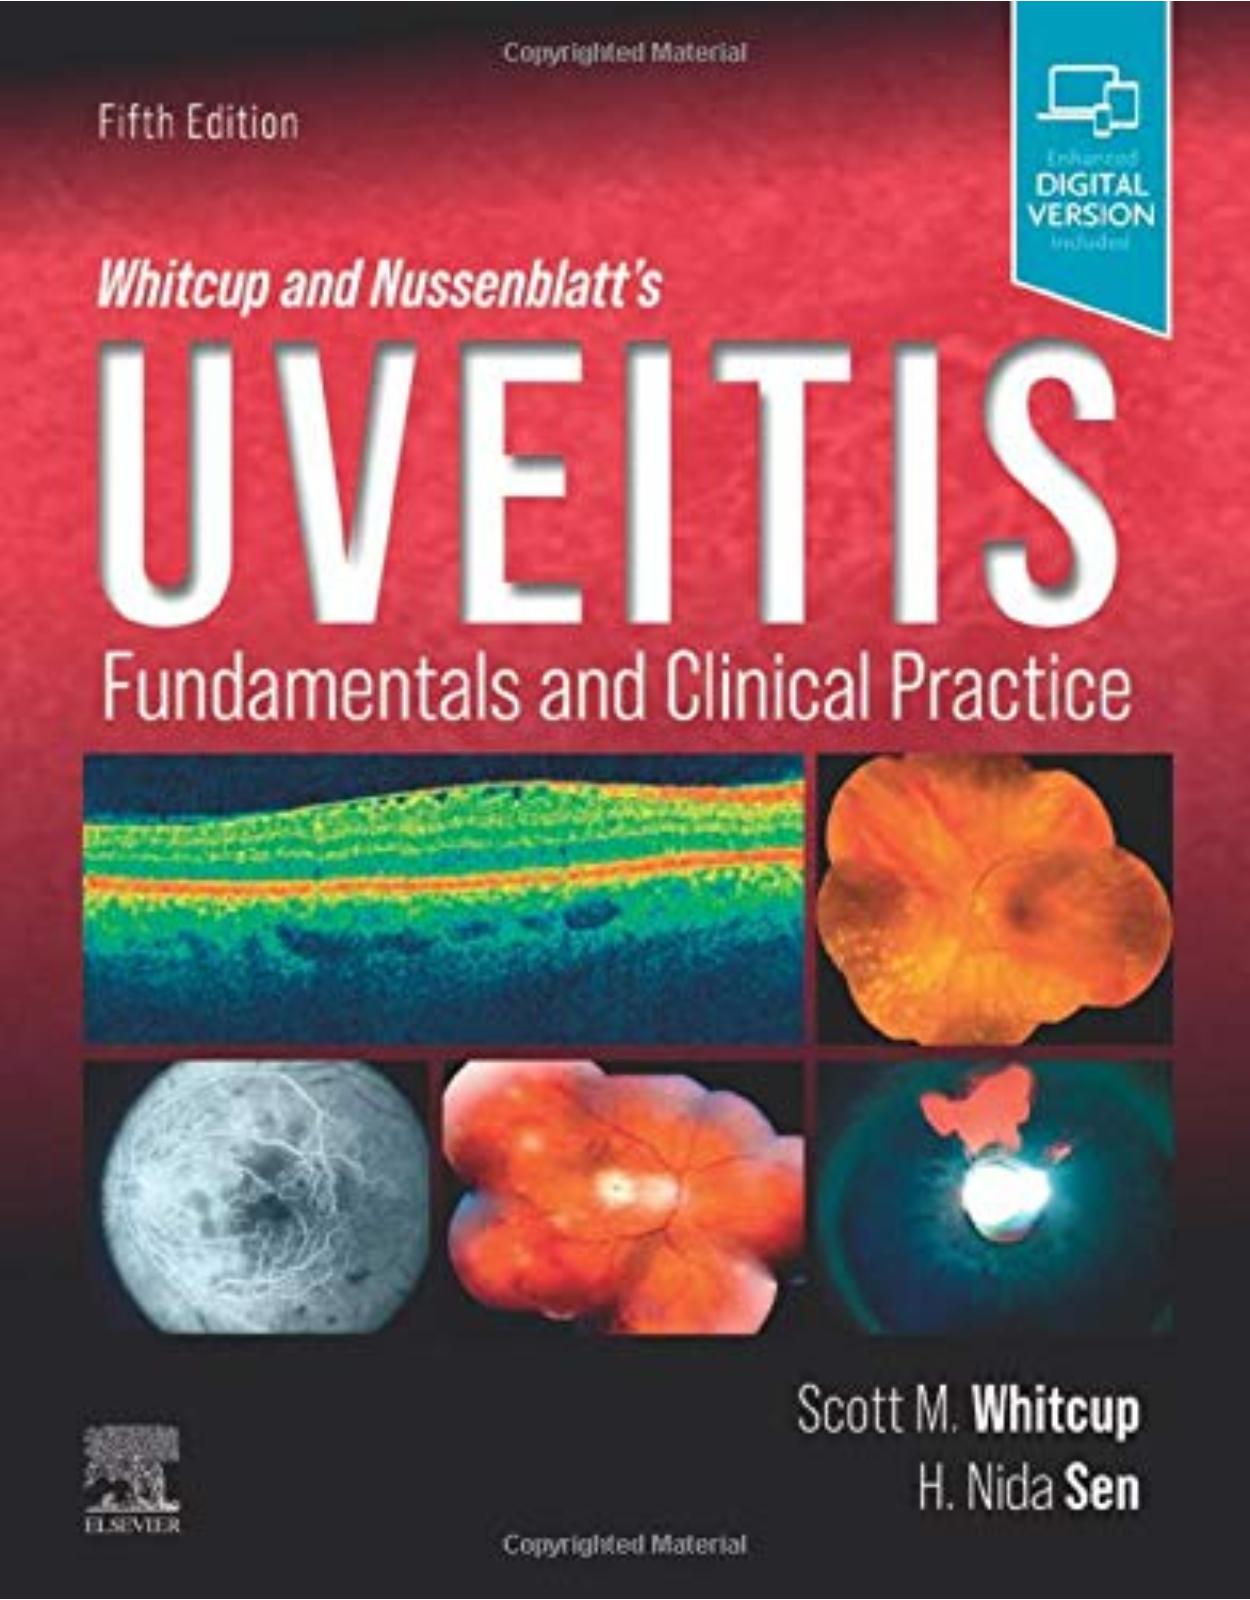 Whitcup and Nussenblatt’s Uveitis: Fundamentals and Clinical Practice 